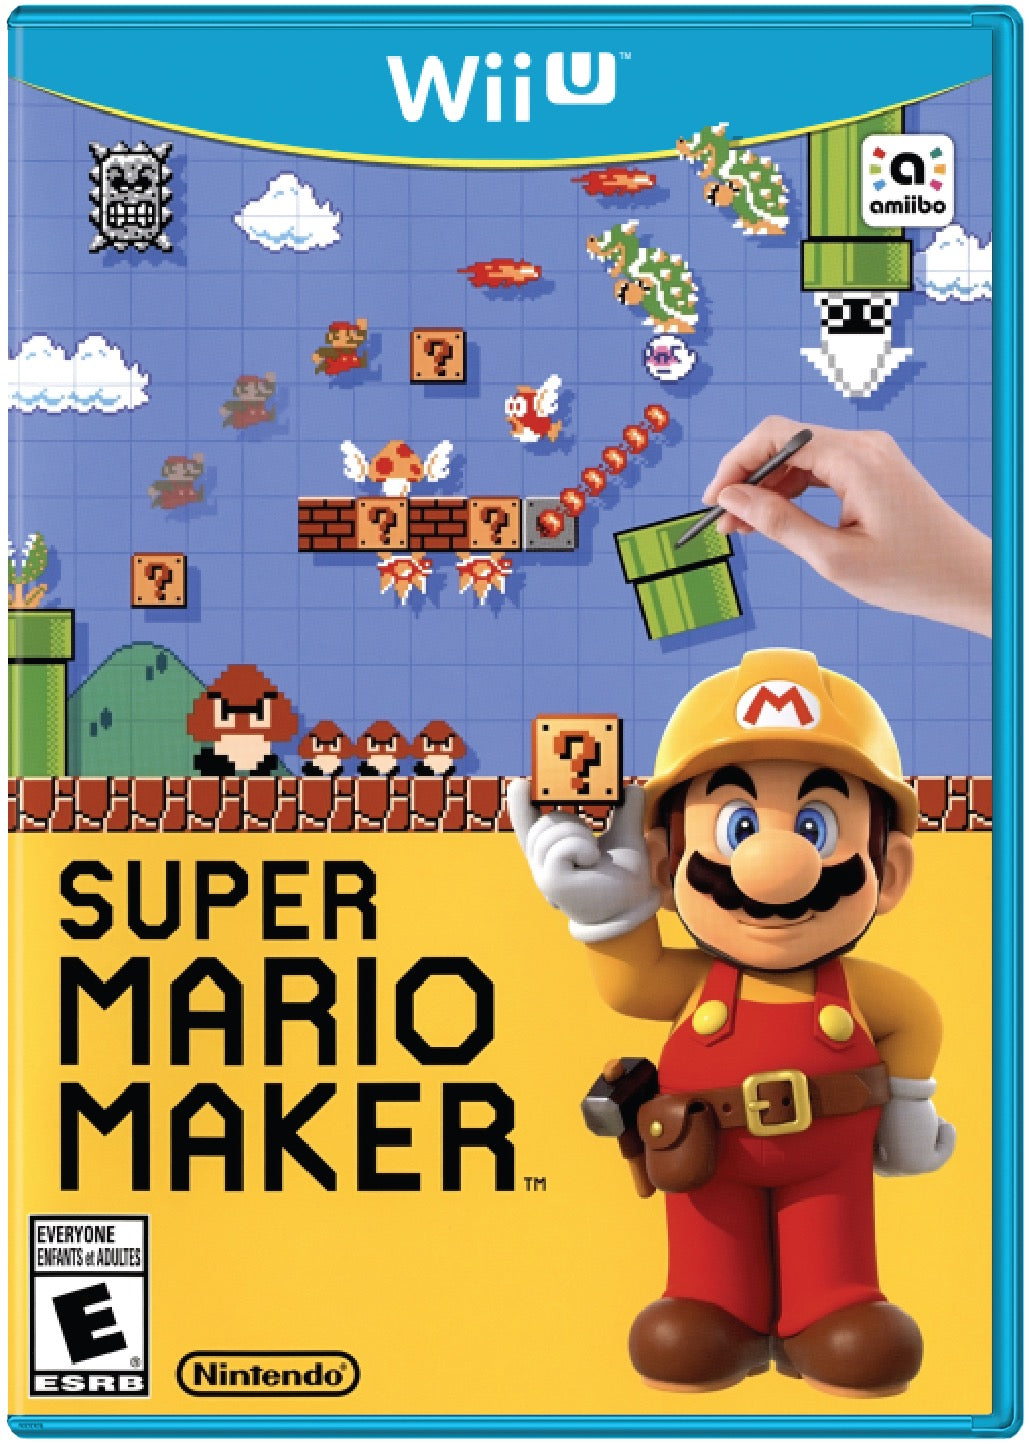 Super Mario Maker Cover Art and Product Photo